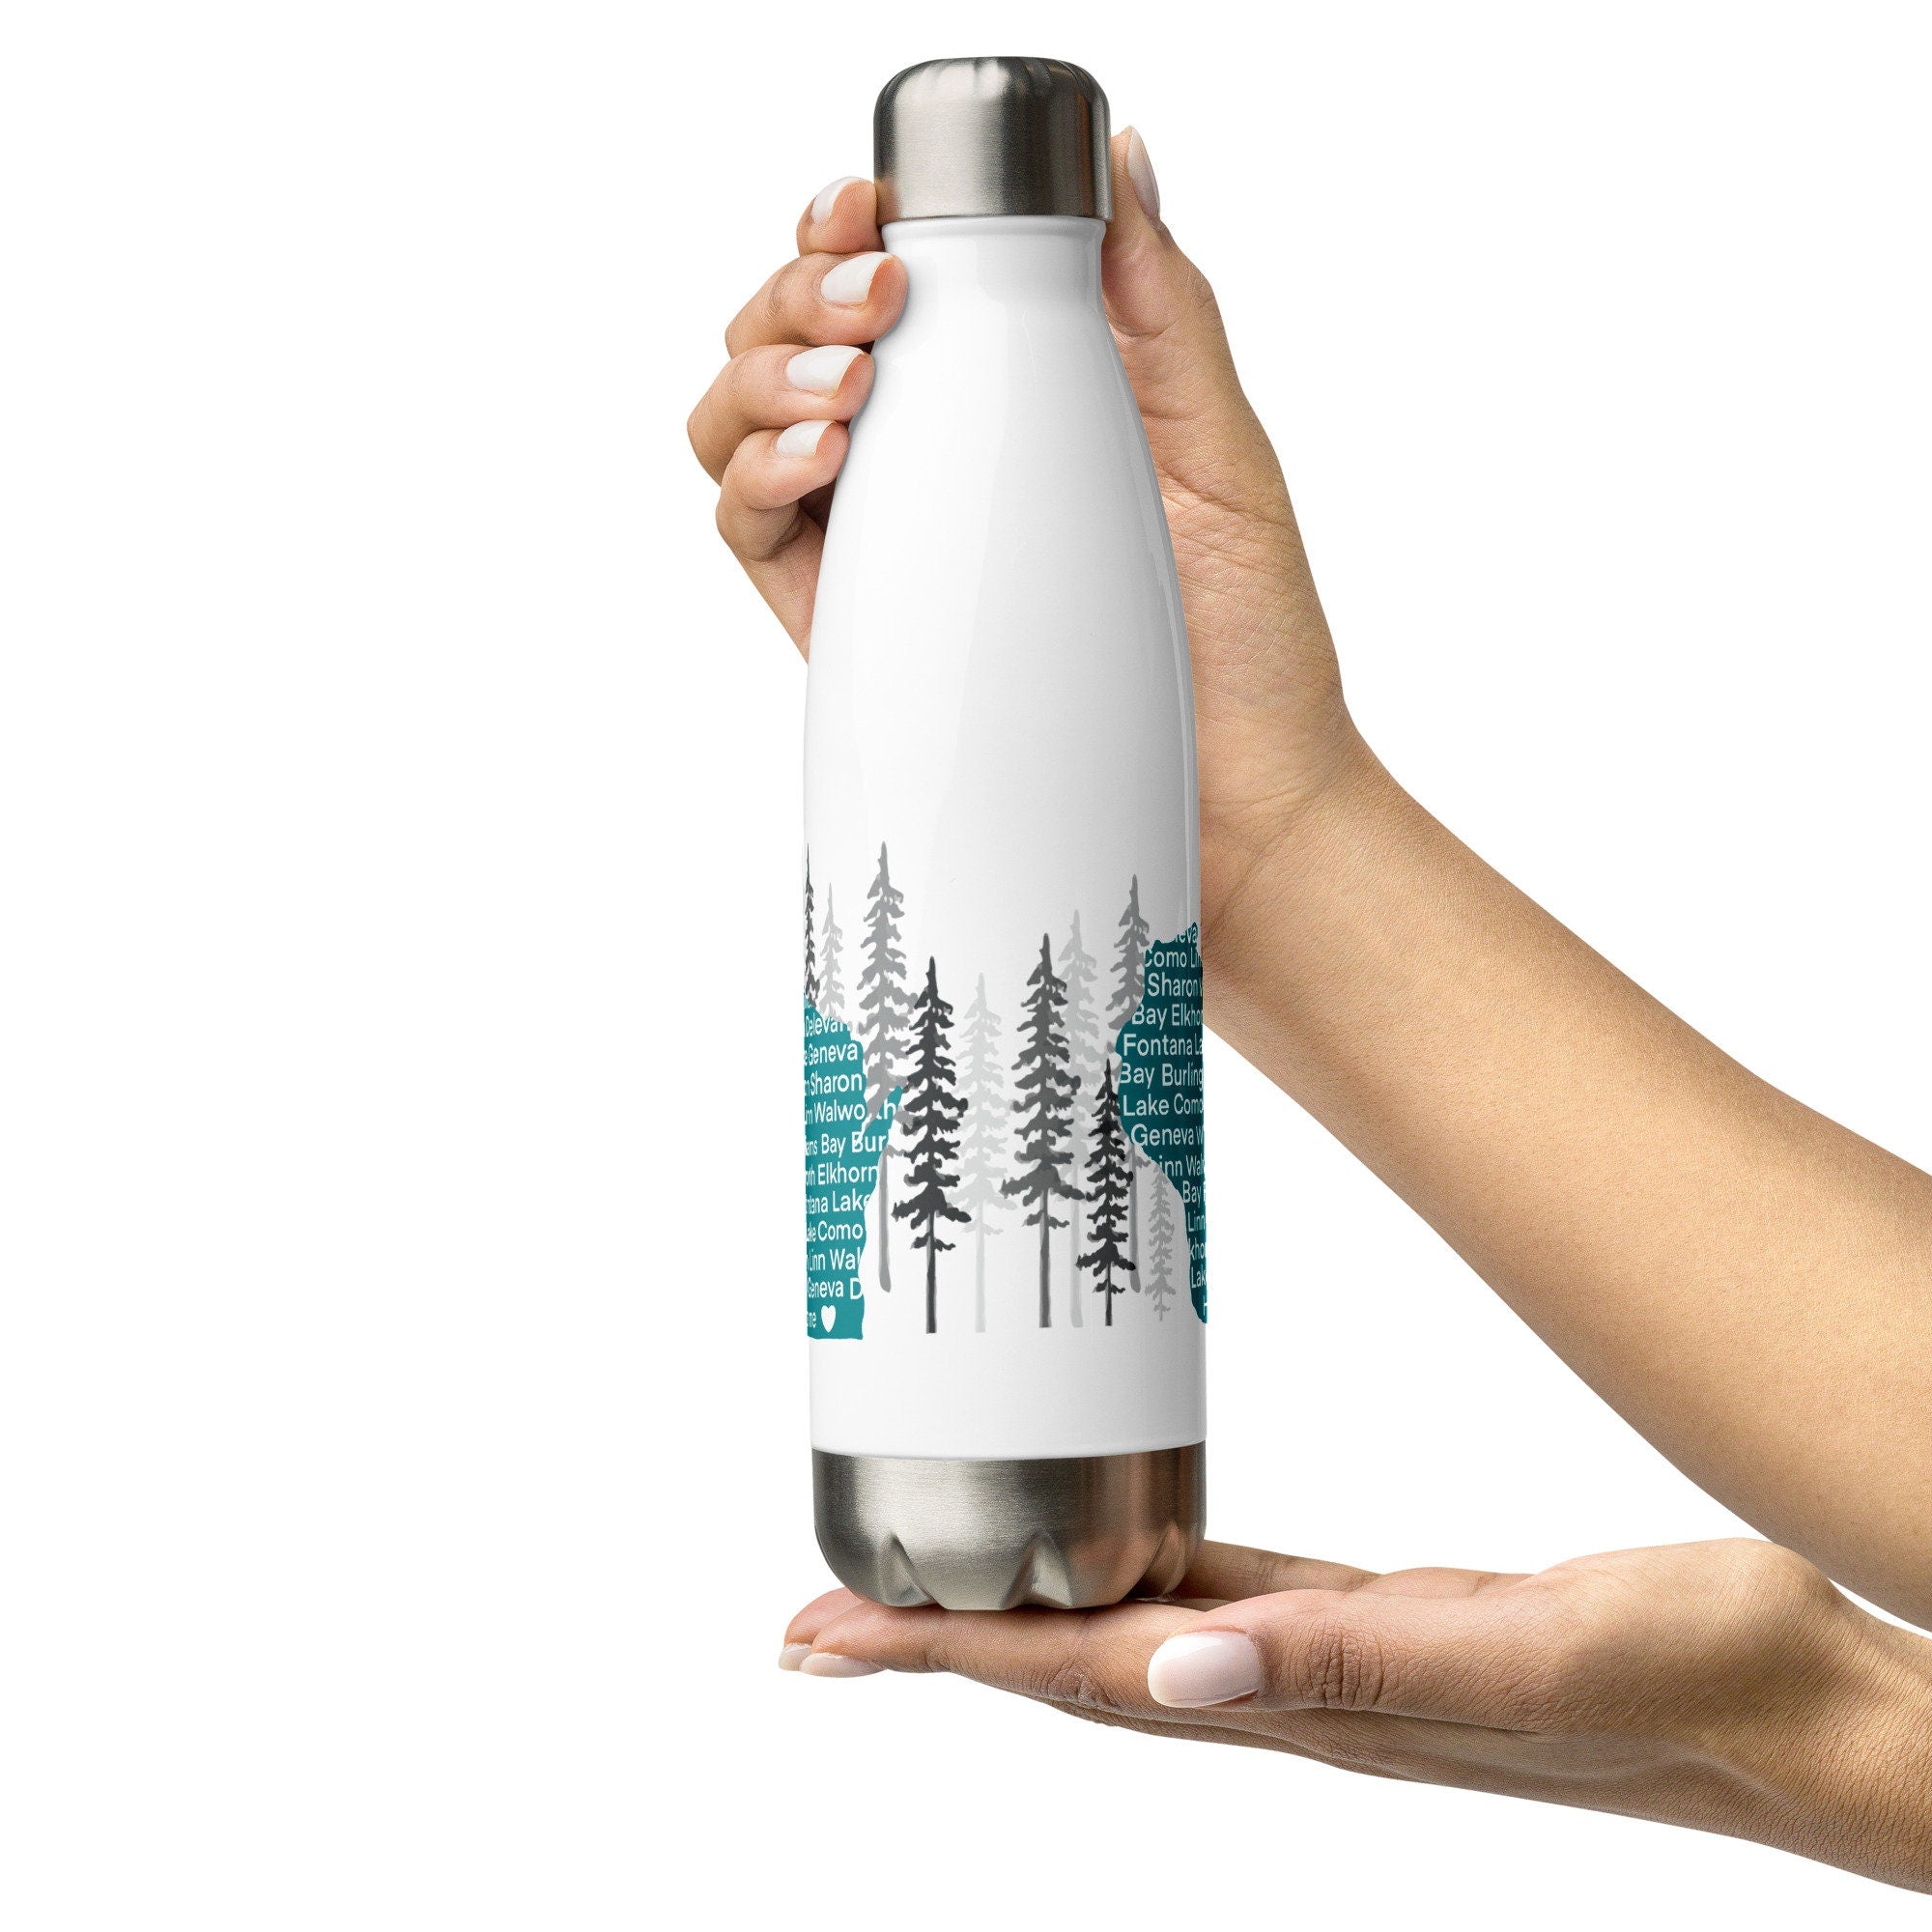 Geneva Lake Map Water Bottle Stainless Steel -Lake Geneva Area Towns Cities you are here Location - Williams bay Fontana Trees Lake Teal